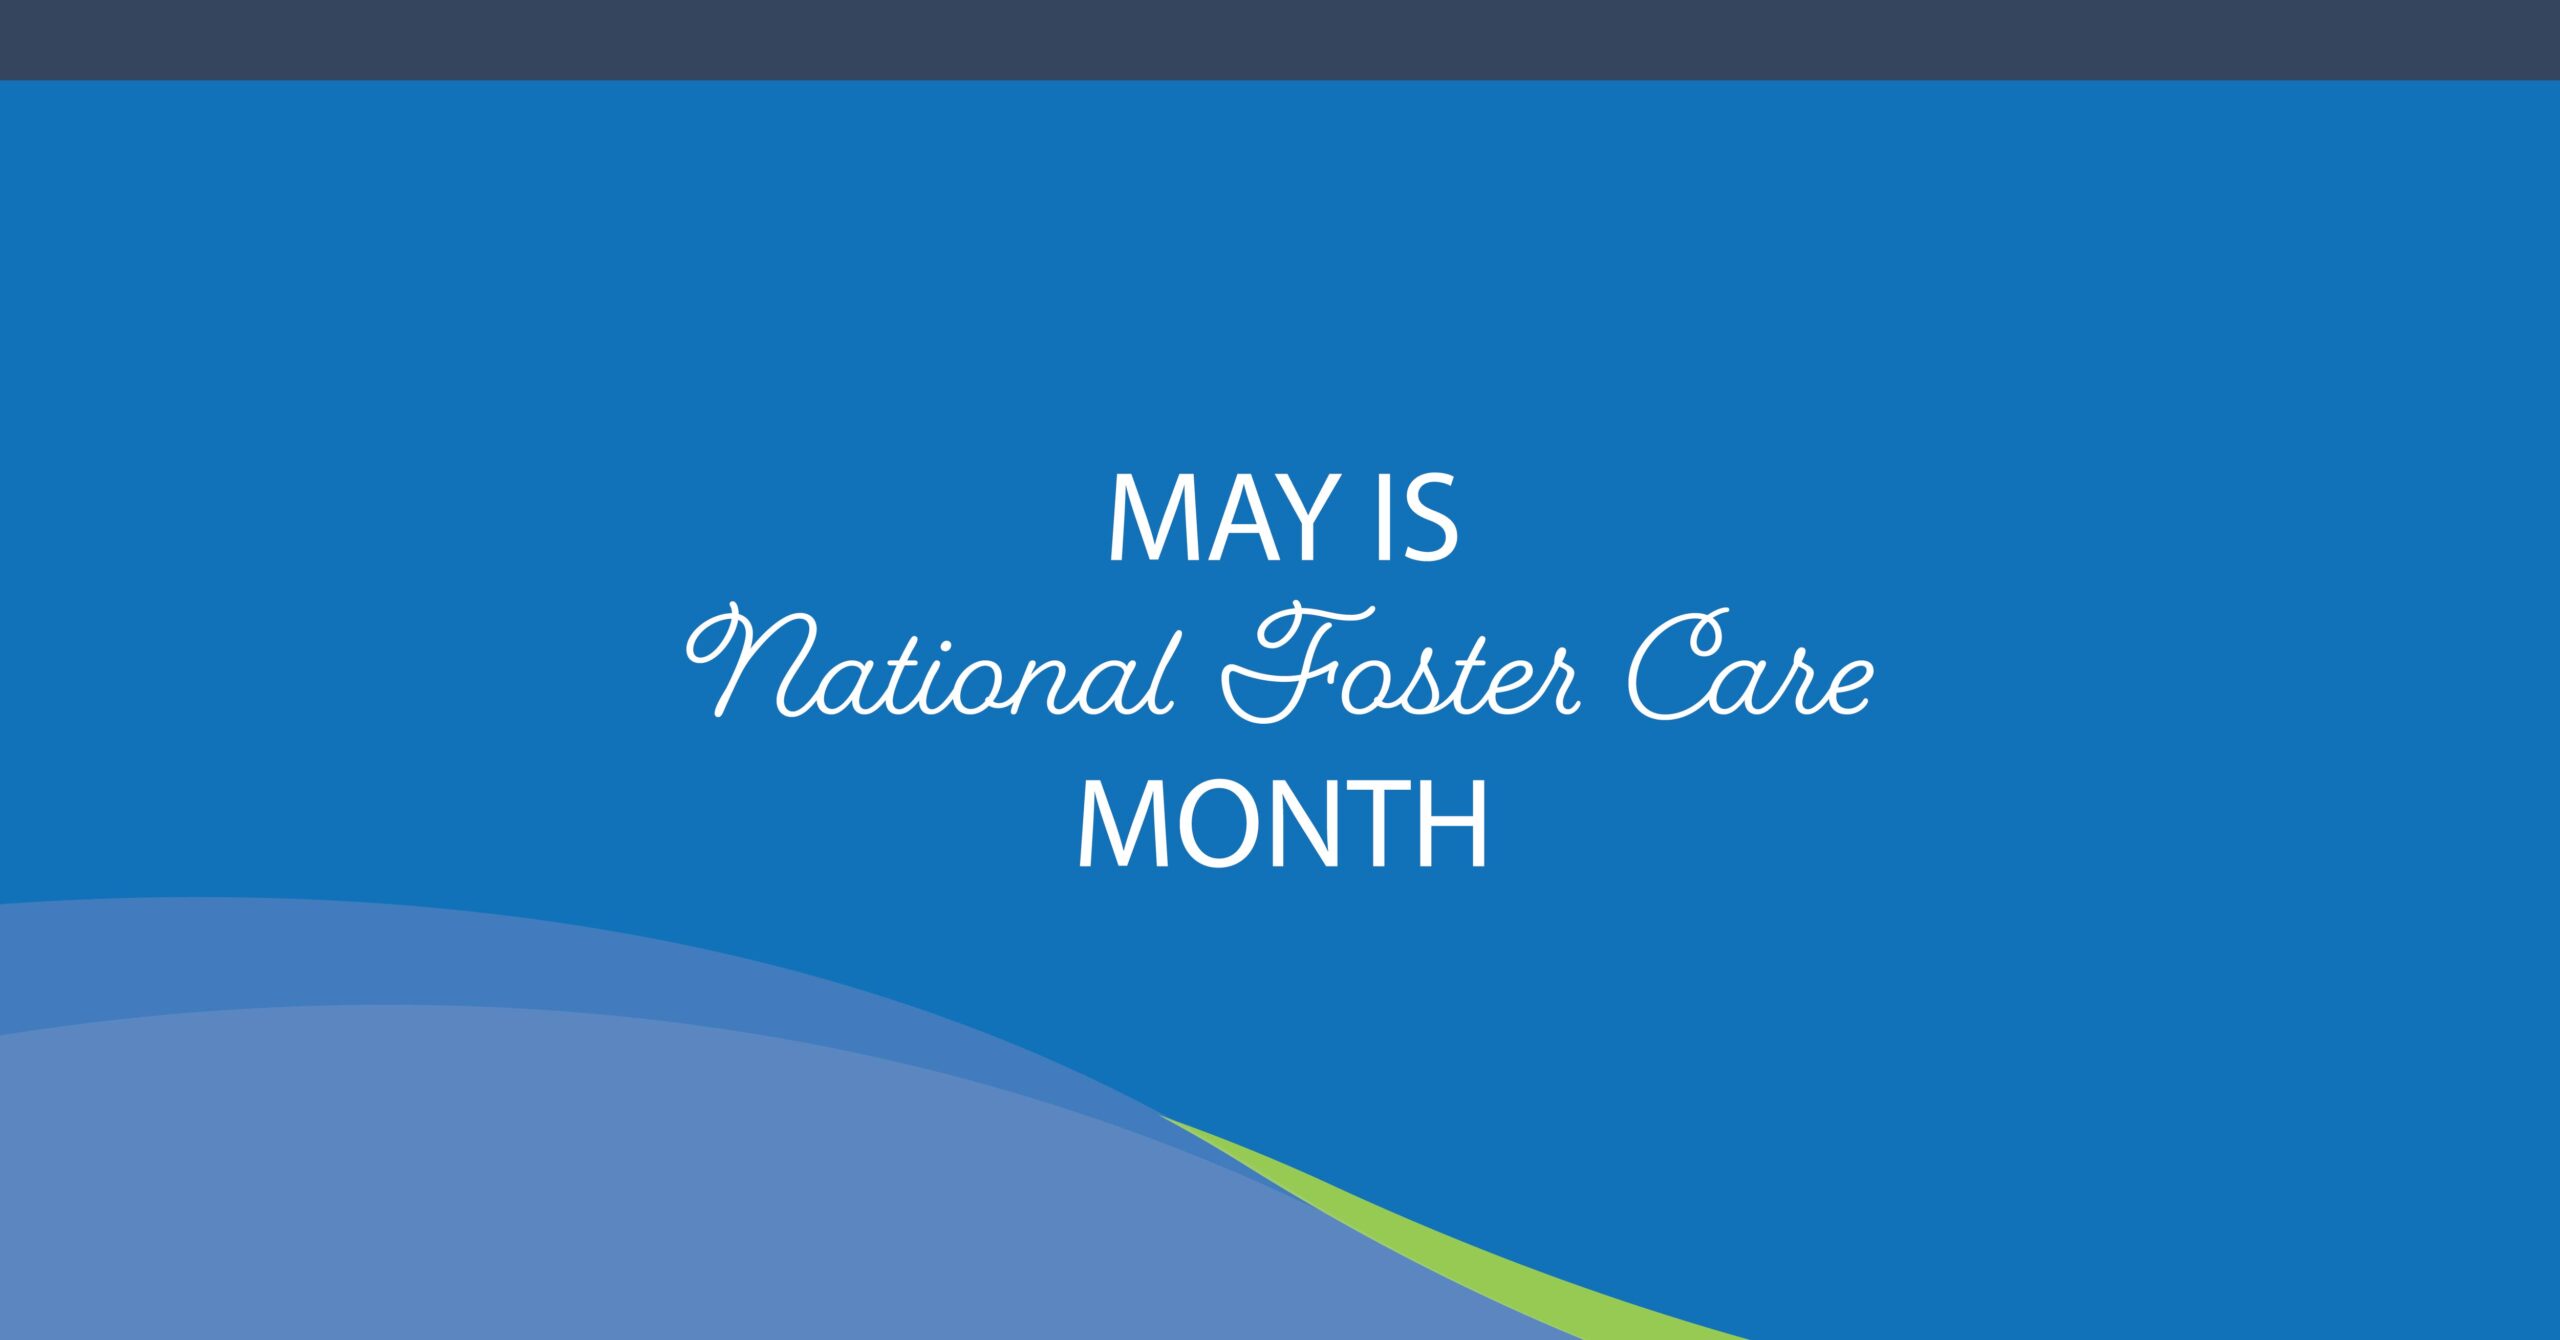 Canopy Promotes National Foster Care Month